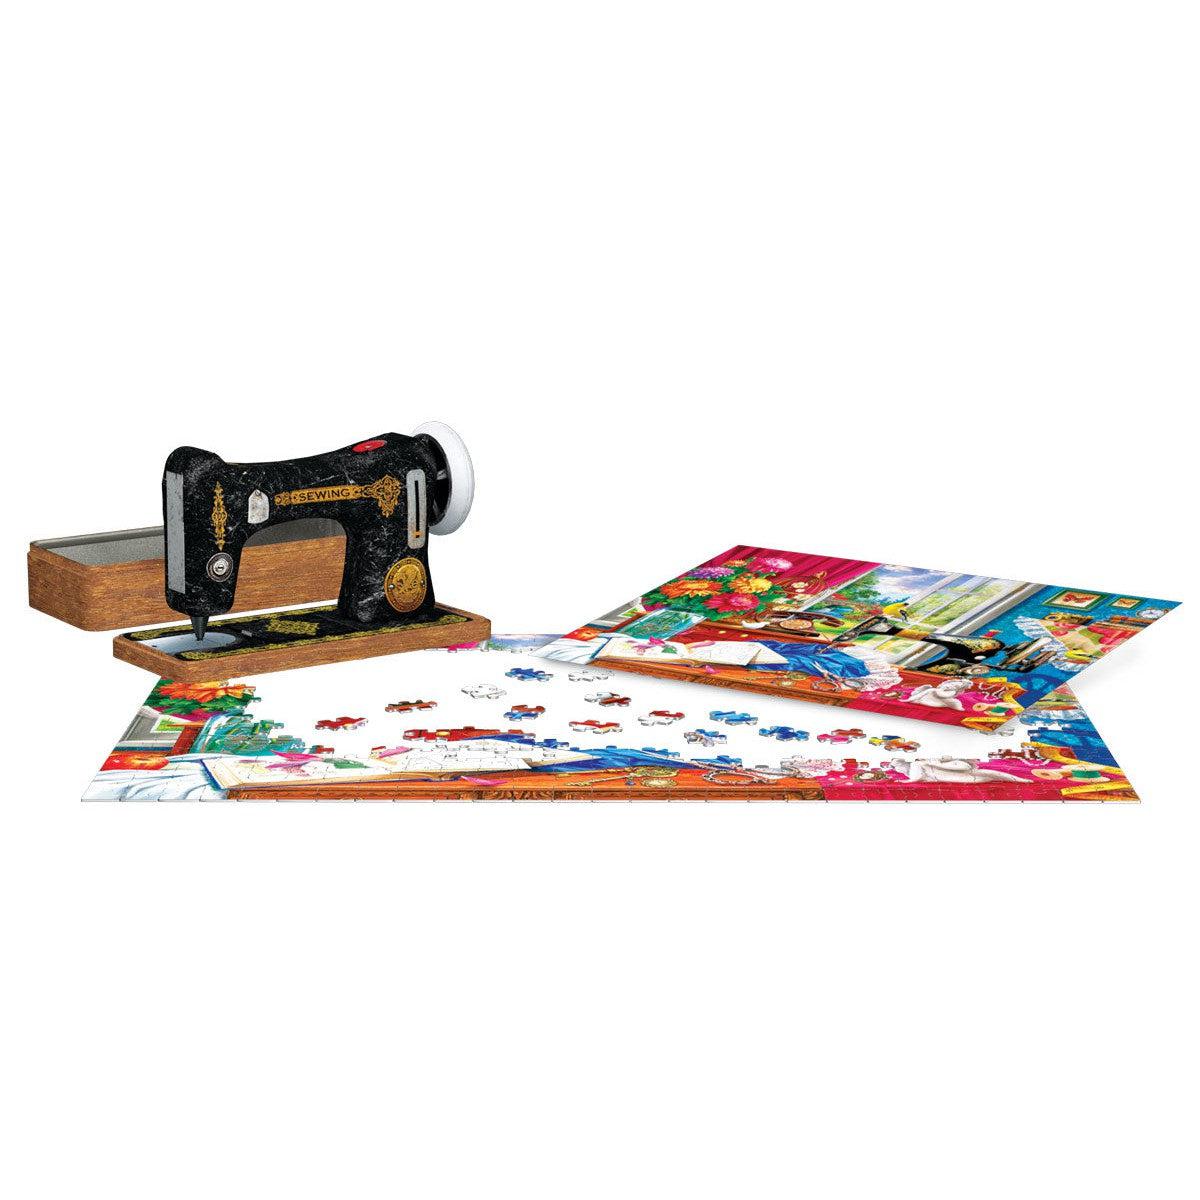 Sewing Memories 550 Piece Jigsaw Puzzle in Tin Eurographics